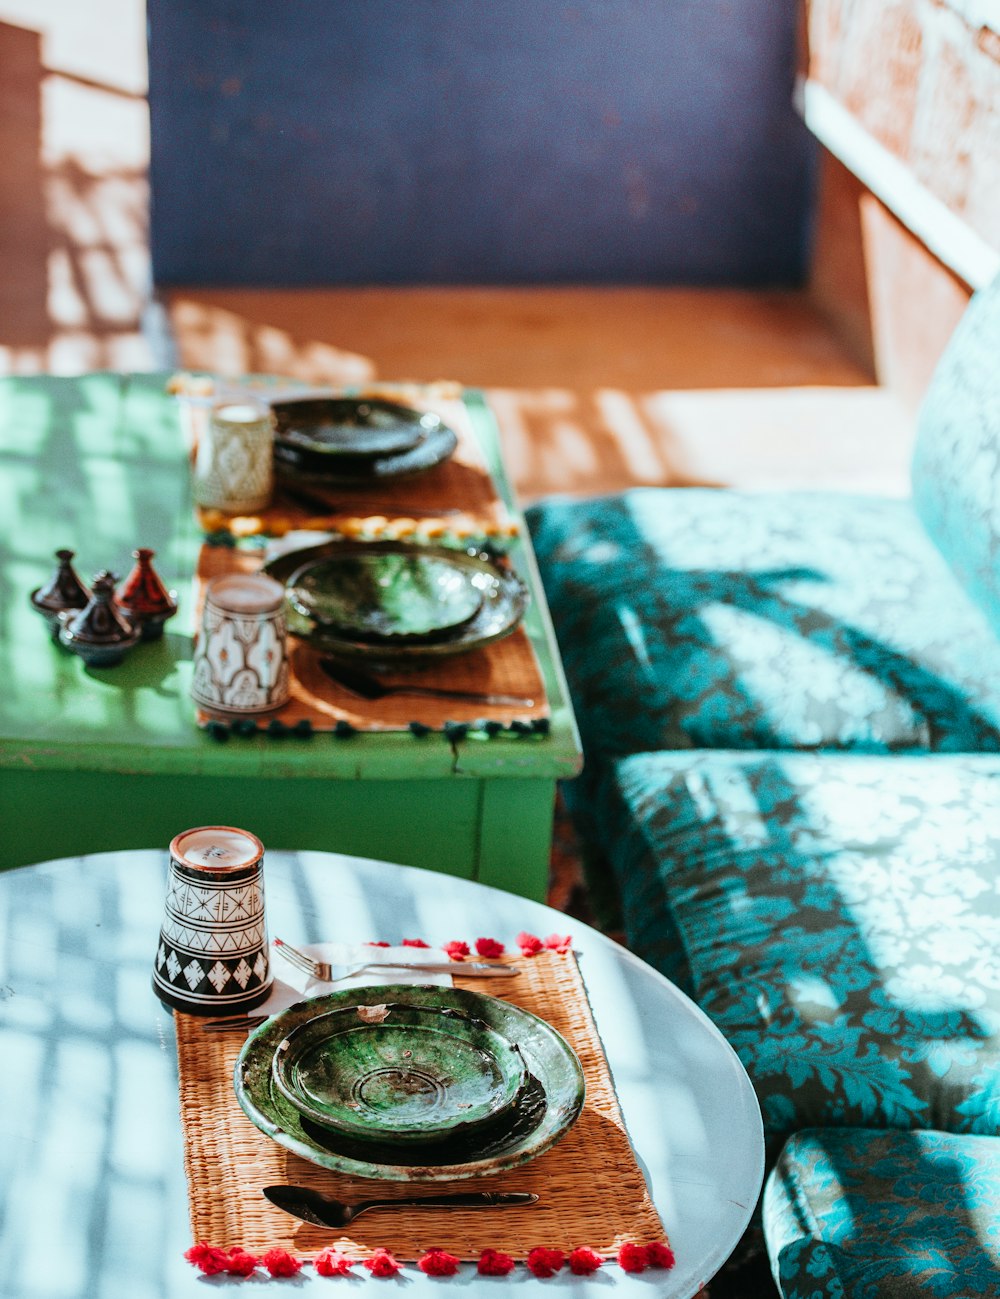 green ceramic saucers on green and teal tables